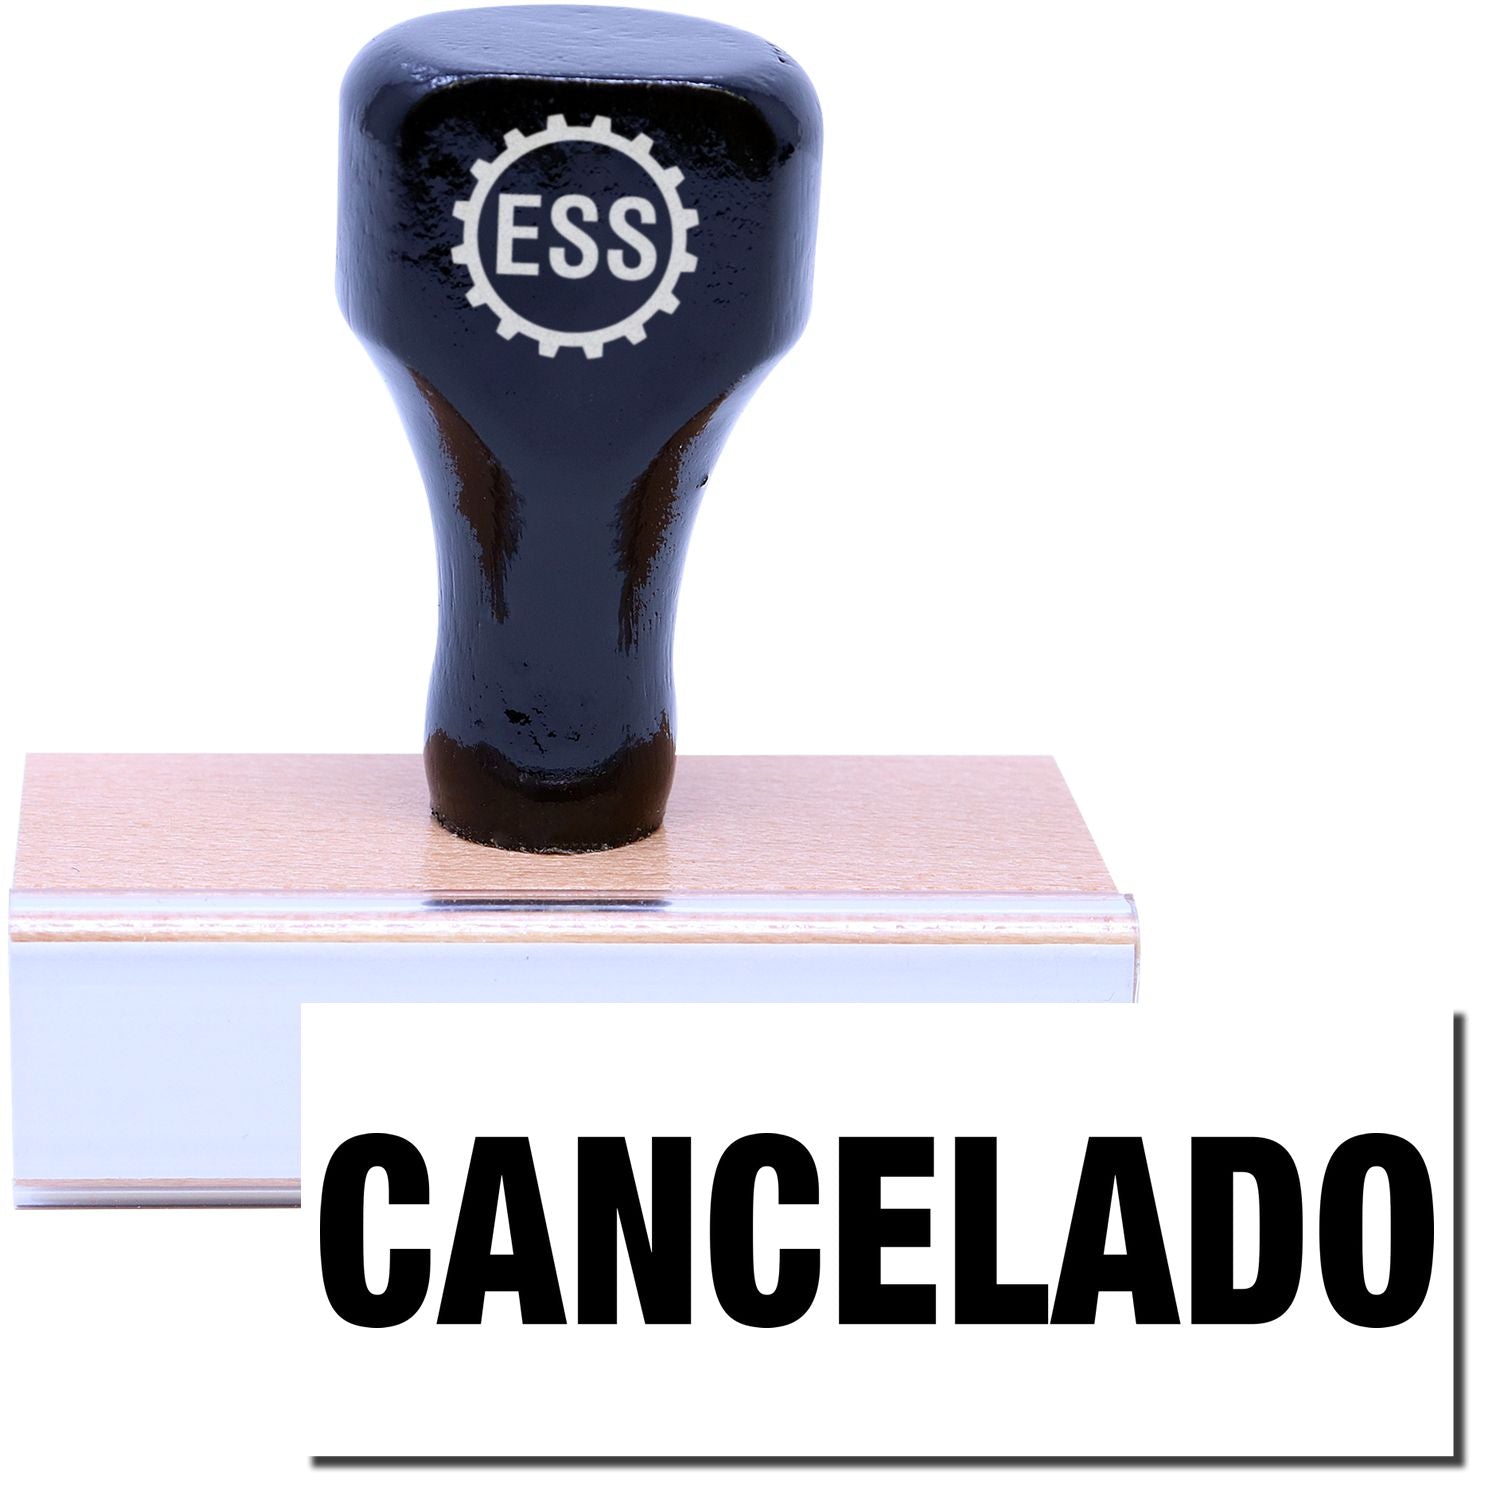 A stock office rubber stamp with a stamped image showing how the text "CANCELADO" is displayed after stamping.